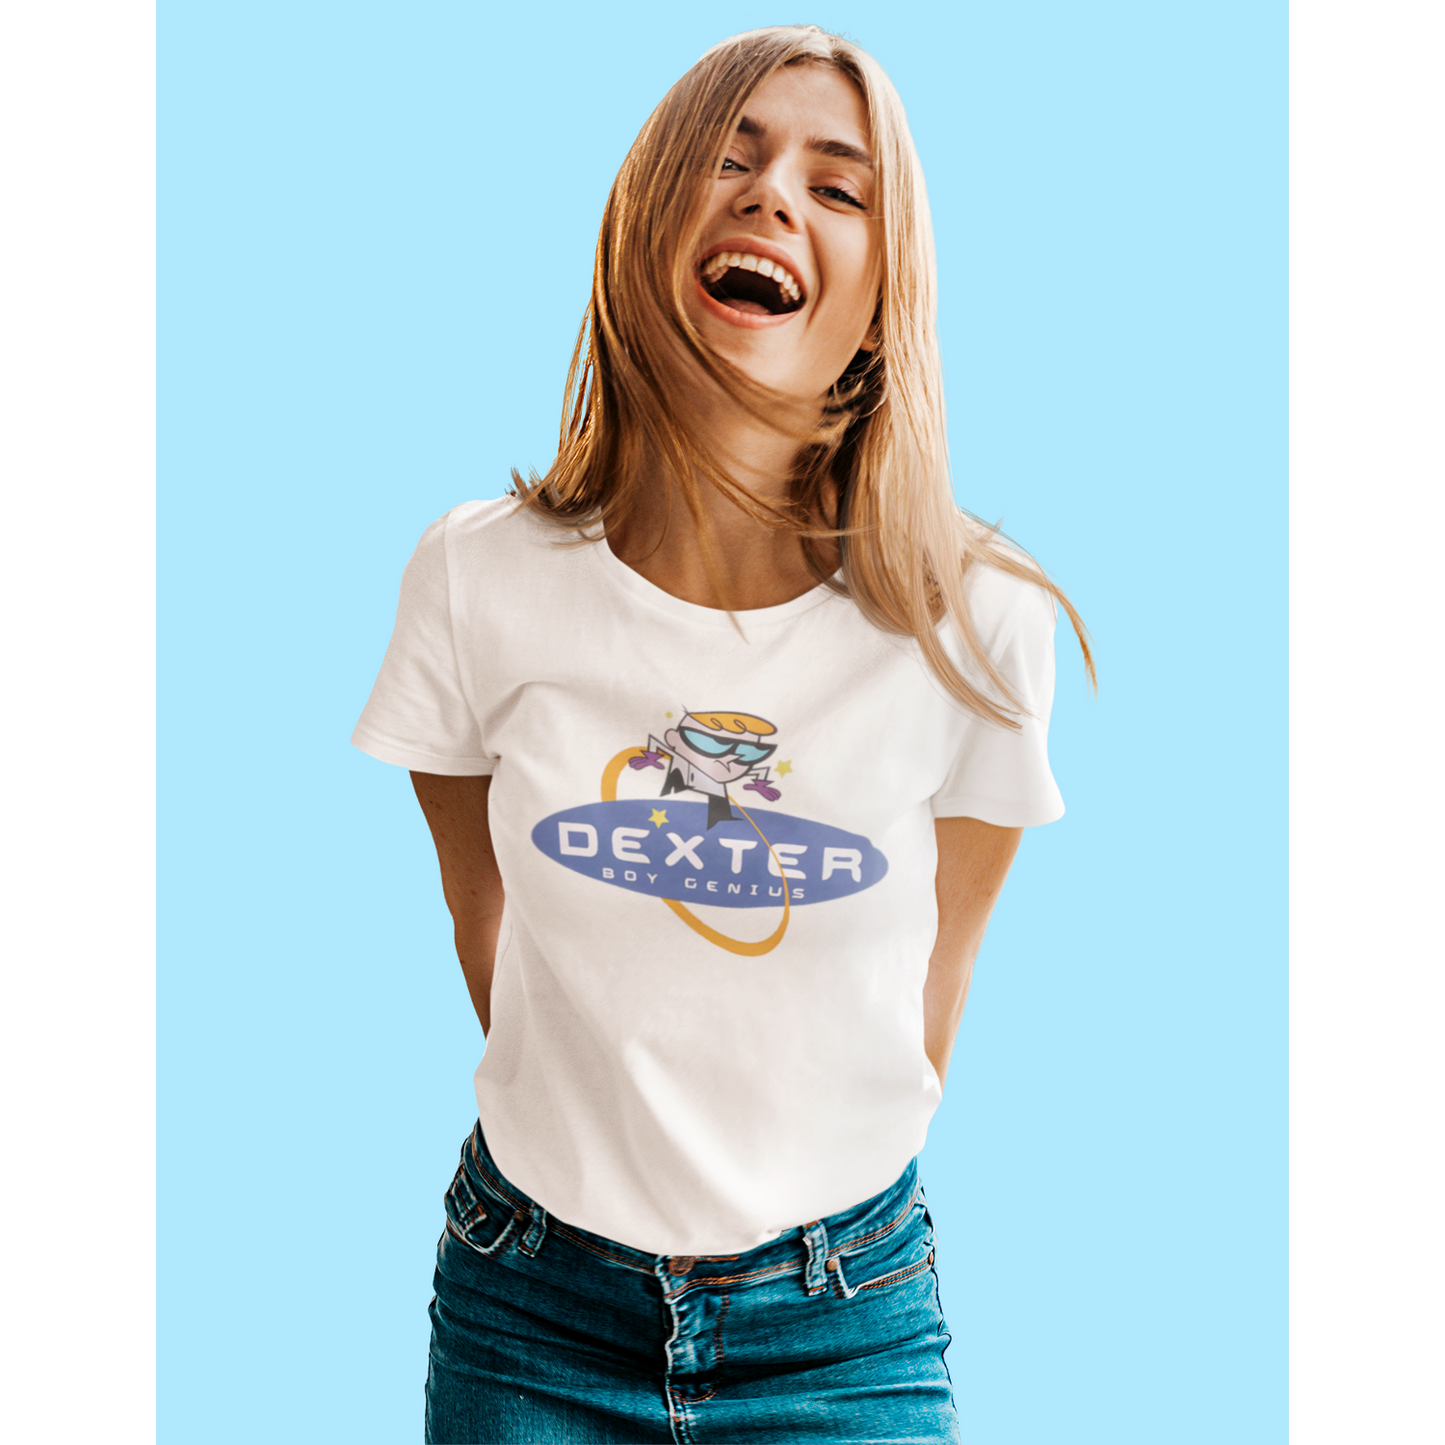 Woman wearing Retro Tees white short sleeve men's unisex t-shirt featuring 90s awesome Dexter boy genius cartoon graphics, officially licenced product